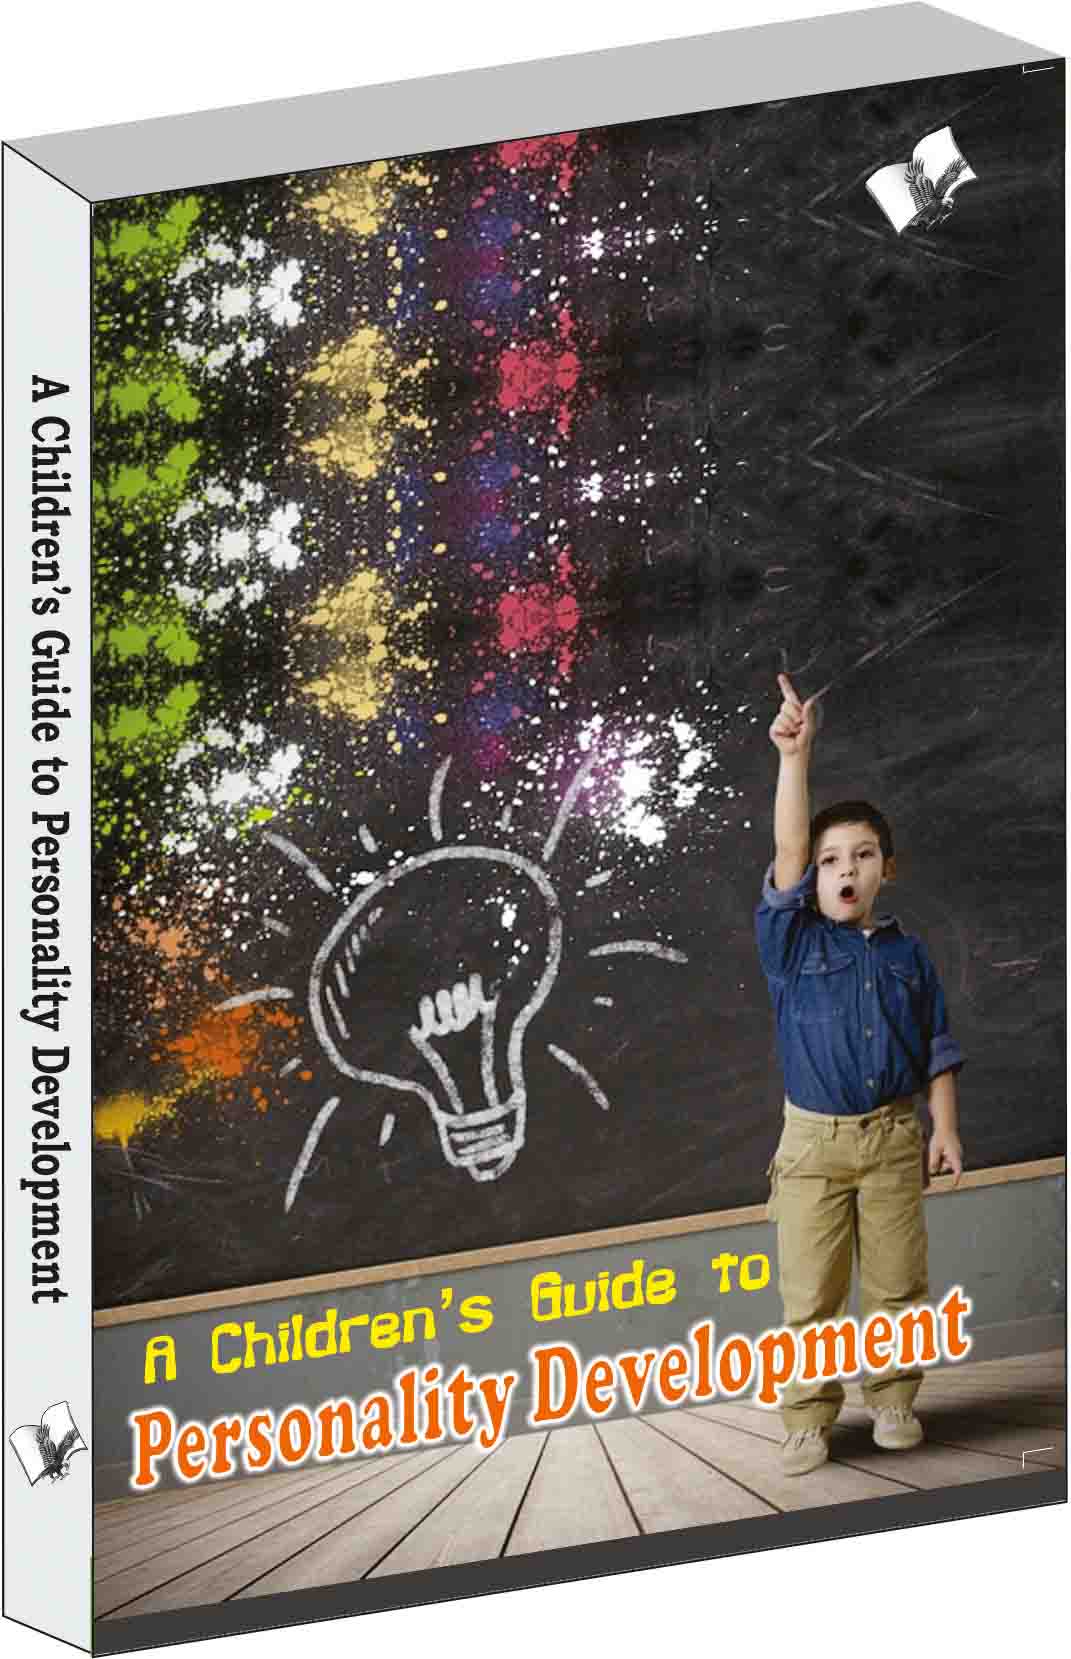 A Children's Guide to Personality Development-Parental guide to enhance a child's total performance